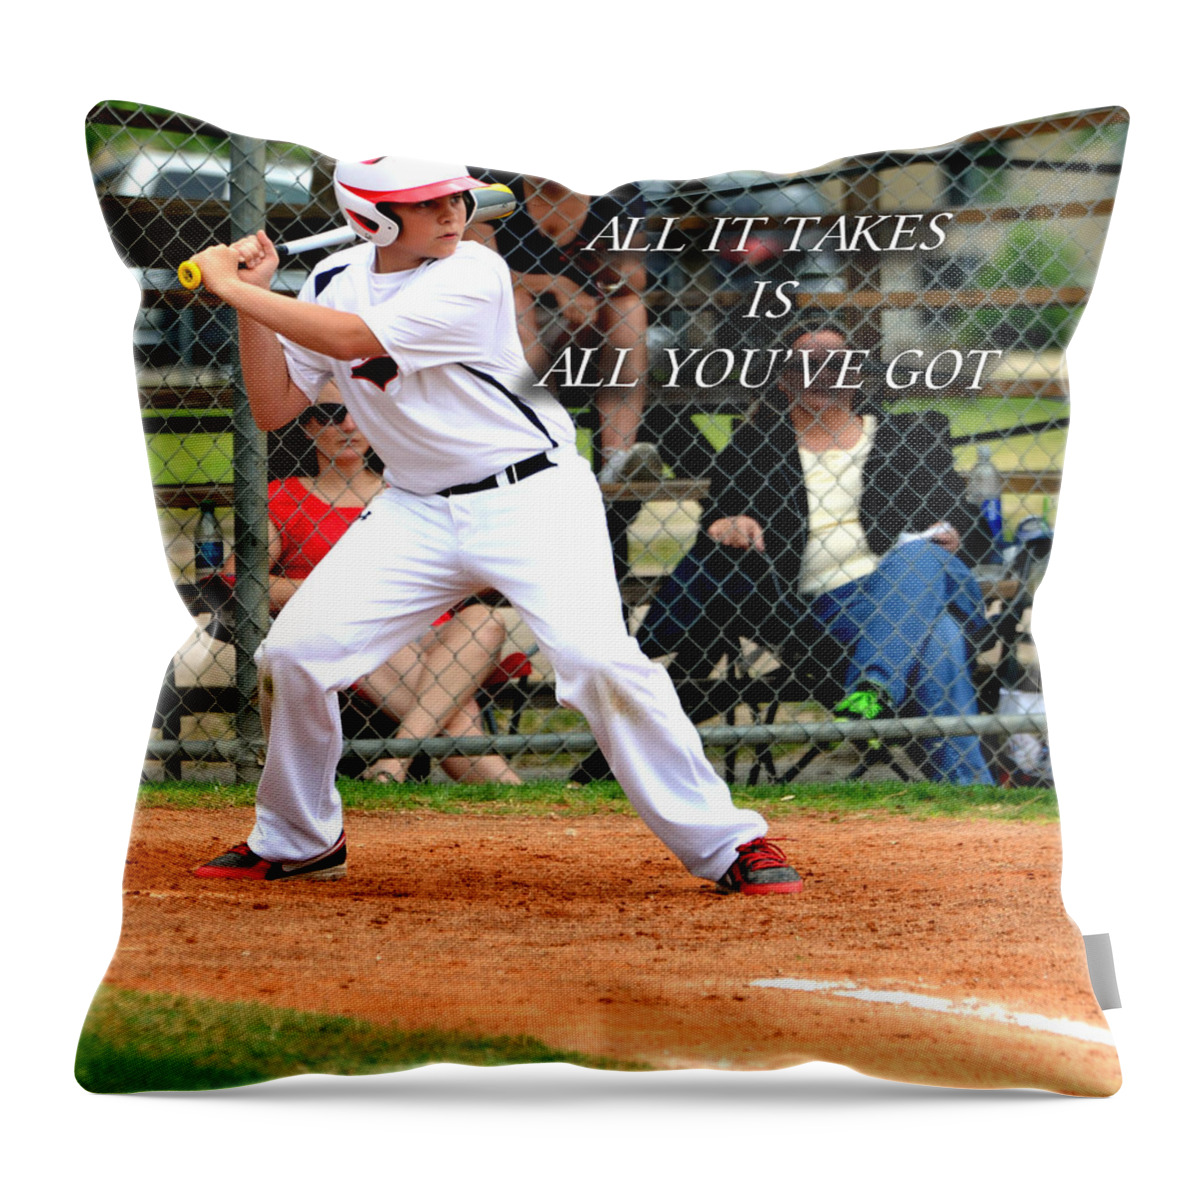 Basball Throw Pillow featuring the photograph All It Takes by Linda Cox